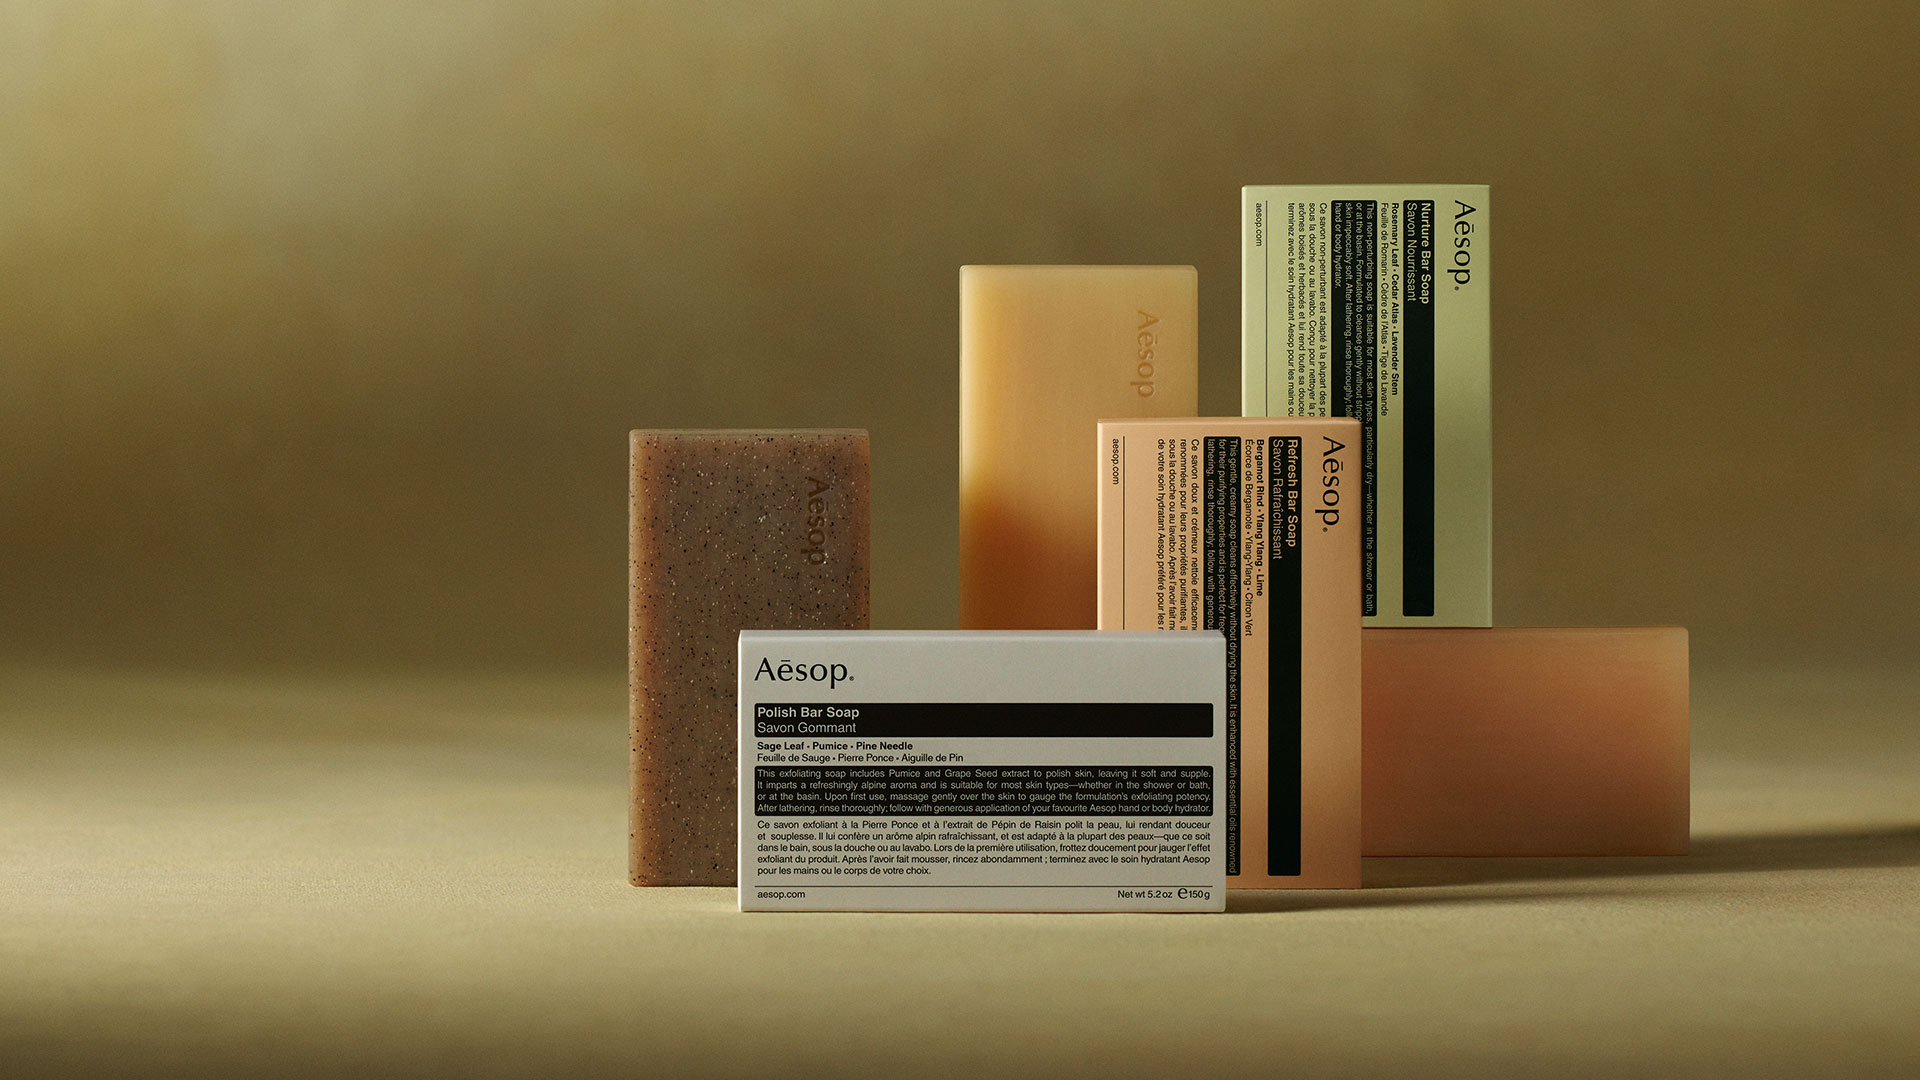 Aesop bar soaps placed next to each other on a green textured background